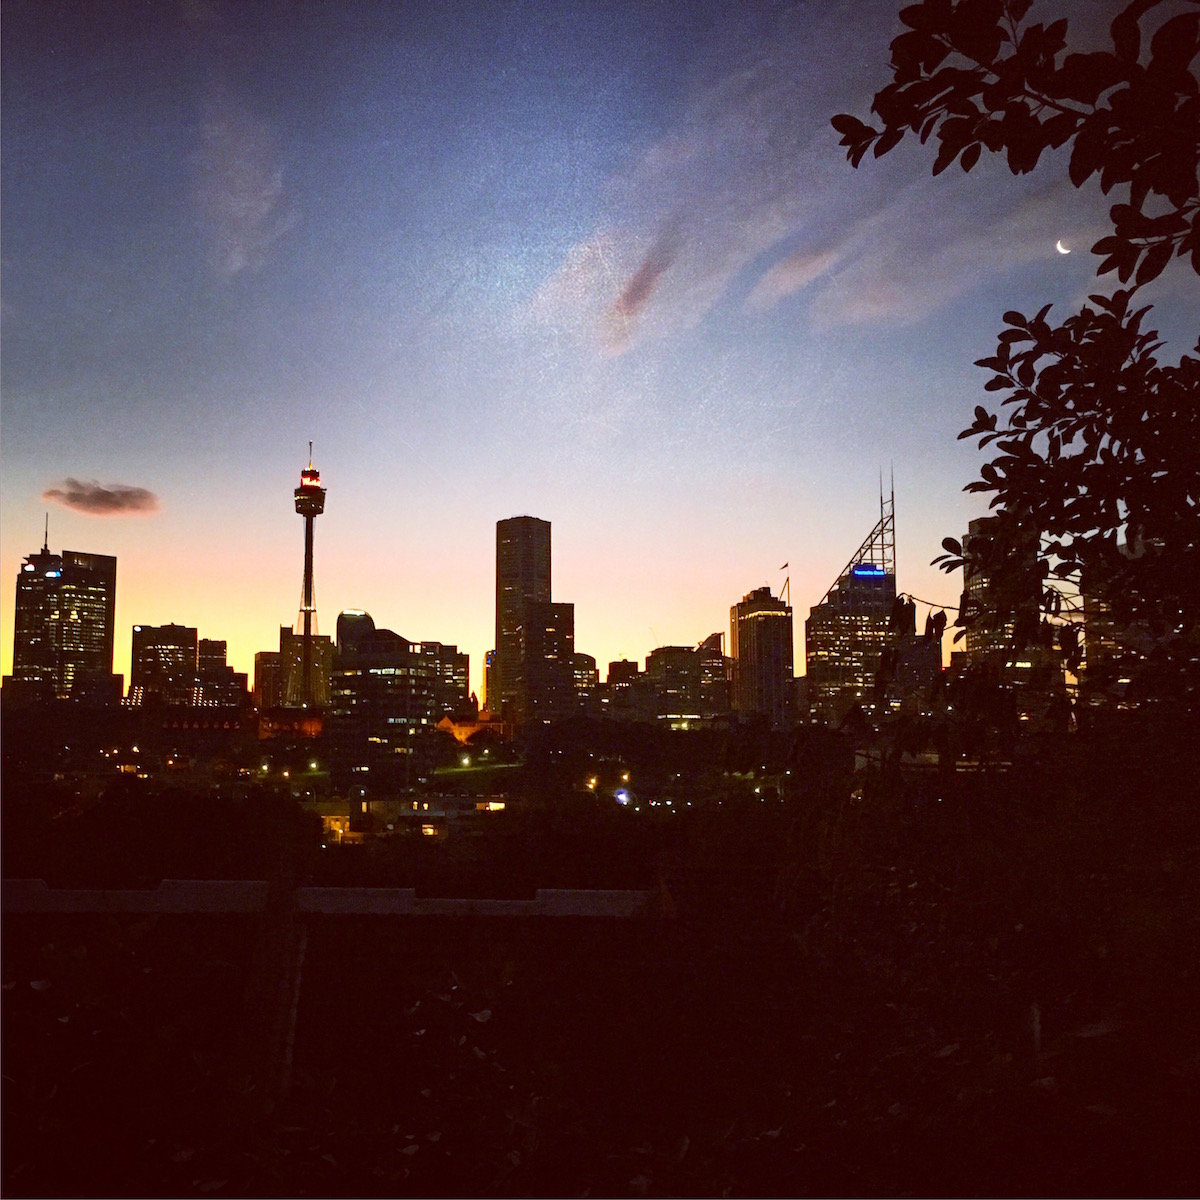 Sunset in Potts Point